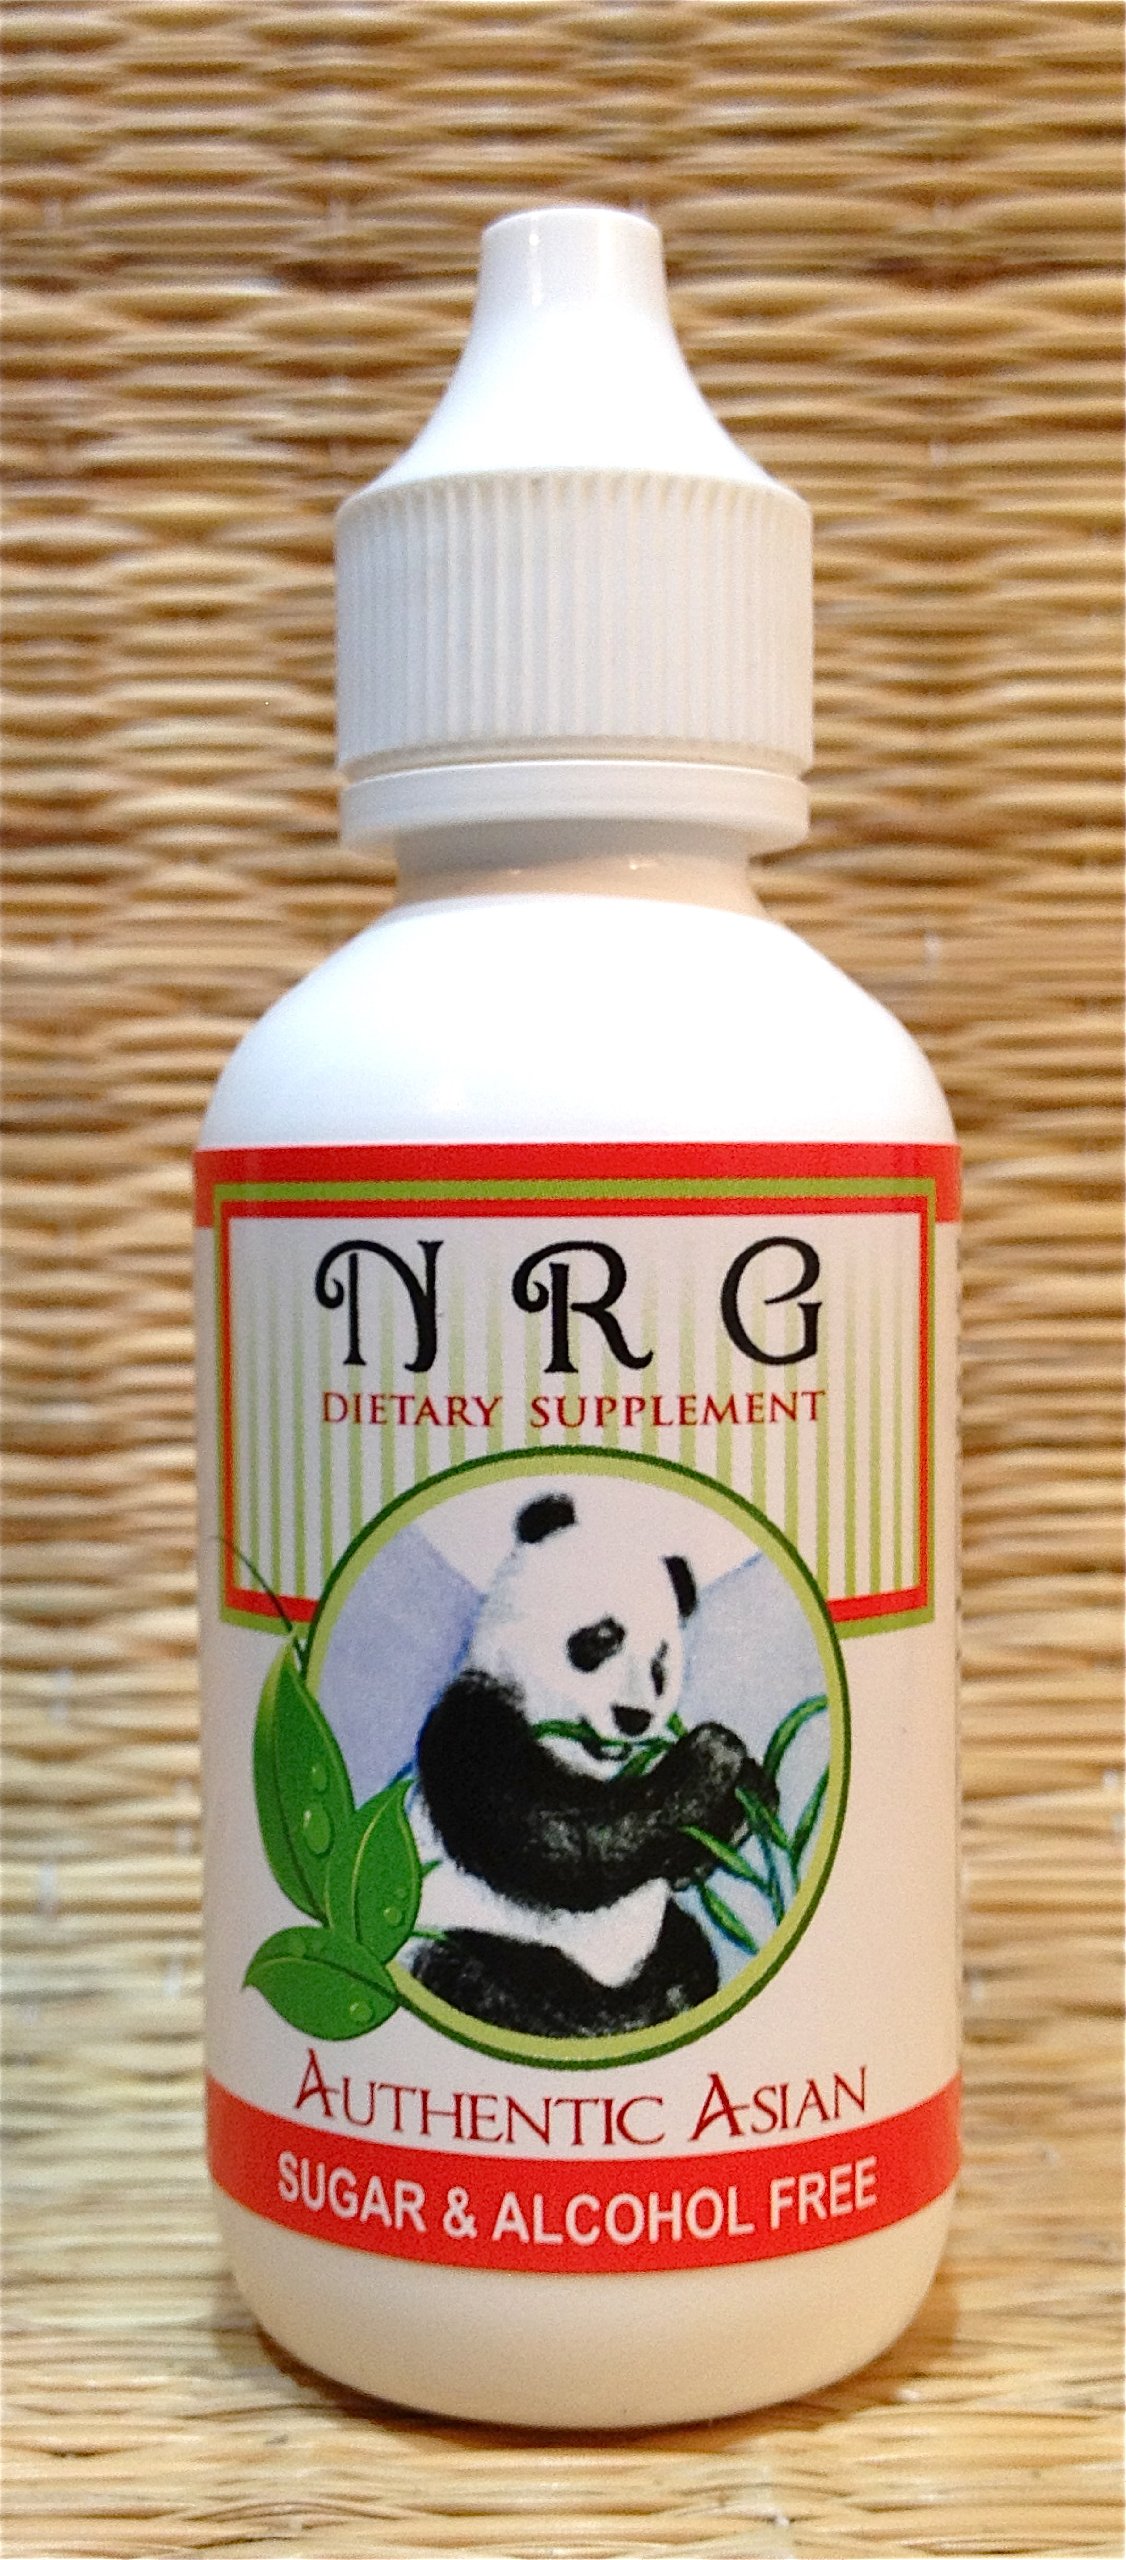 NRG (2 oz Bottle) - Energy Drops. Caffeine Free, BVO Free, Sugar Free. Just Add a Few Drops to Your Water. Golf, Running, Work Outs at Gym. Used Safely and Effectively for Over 20 Years.